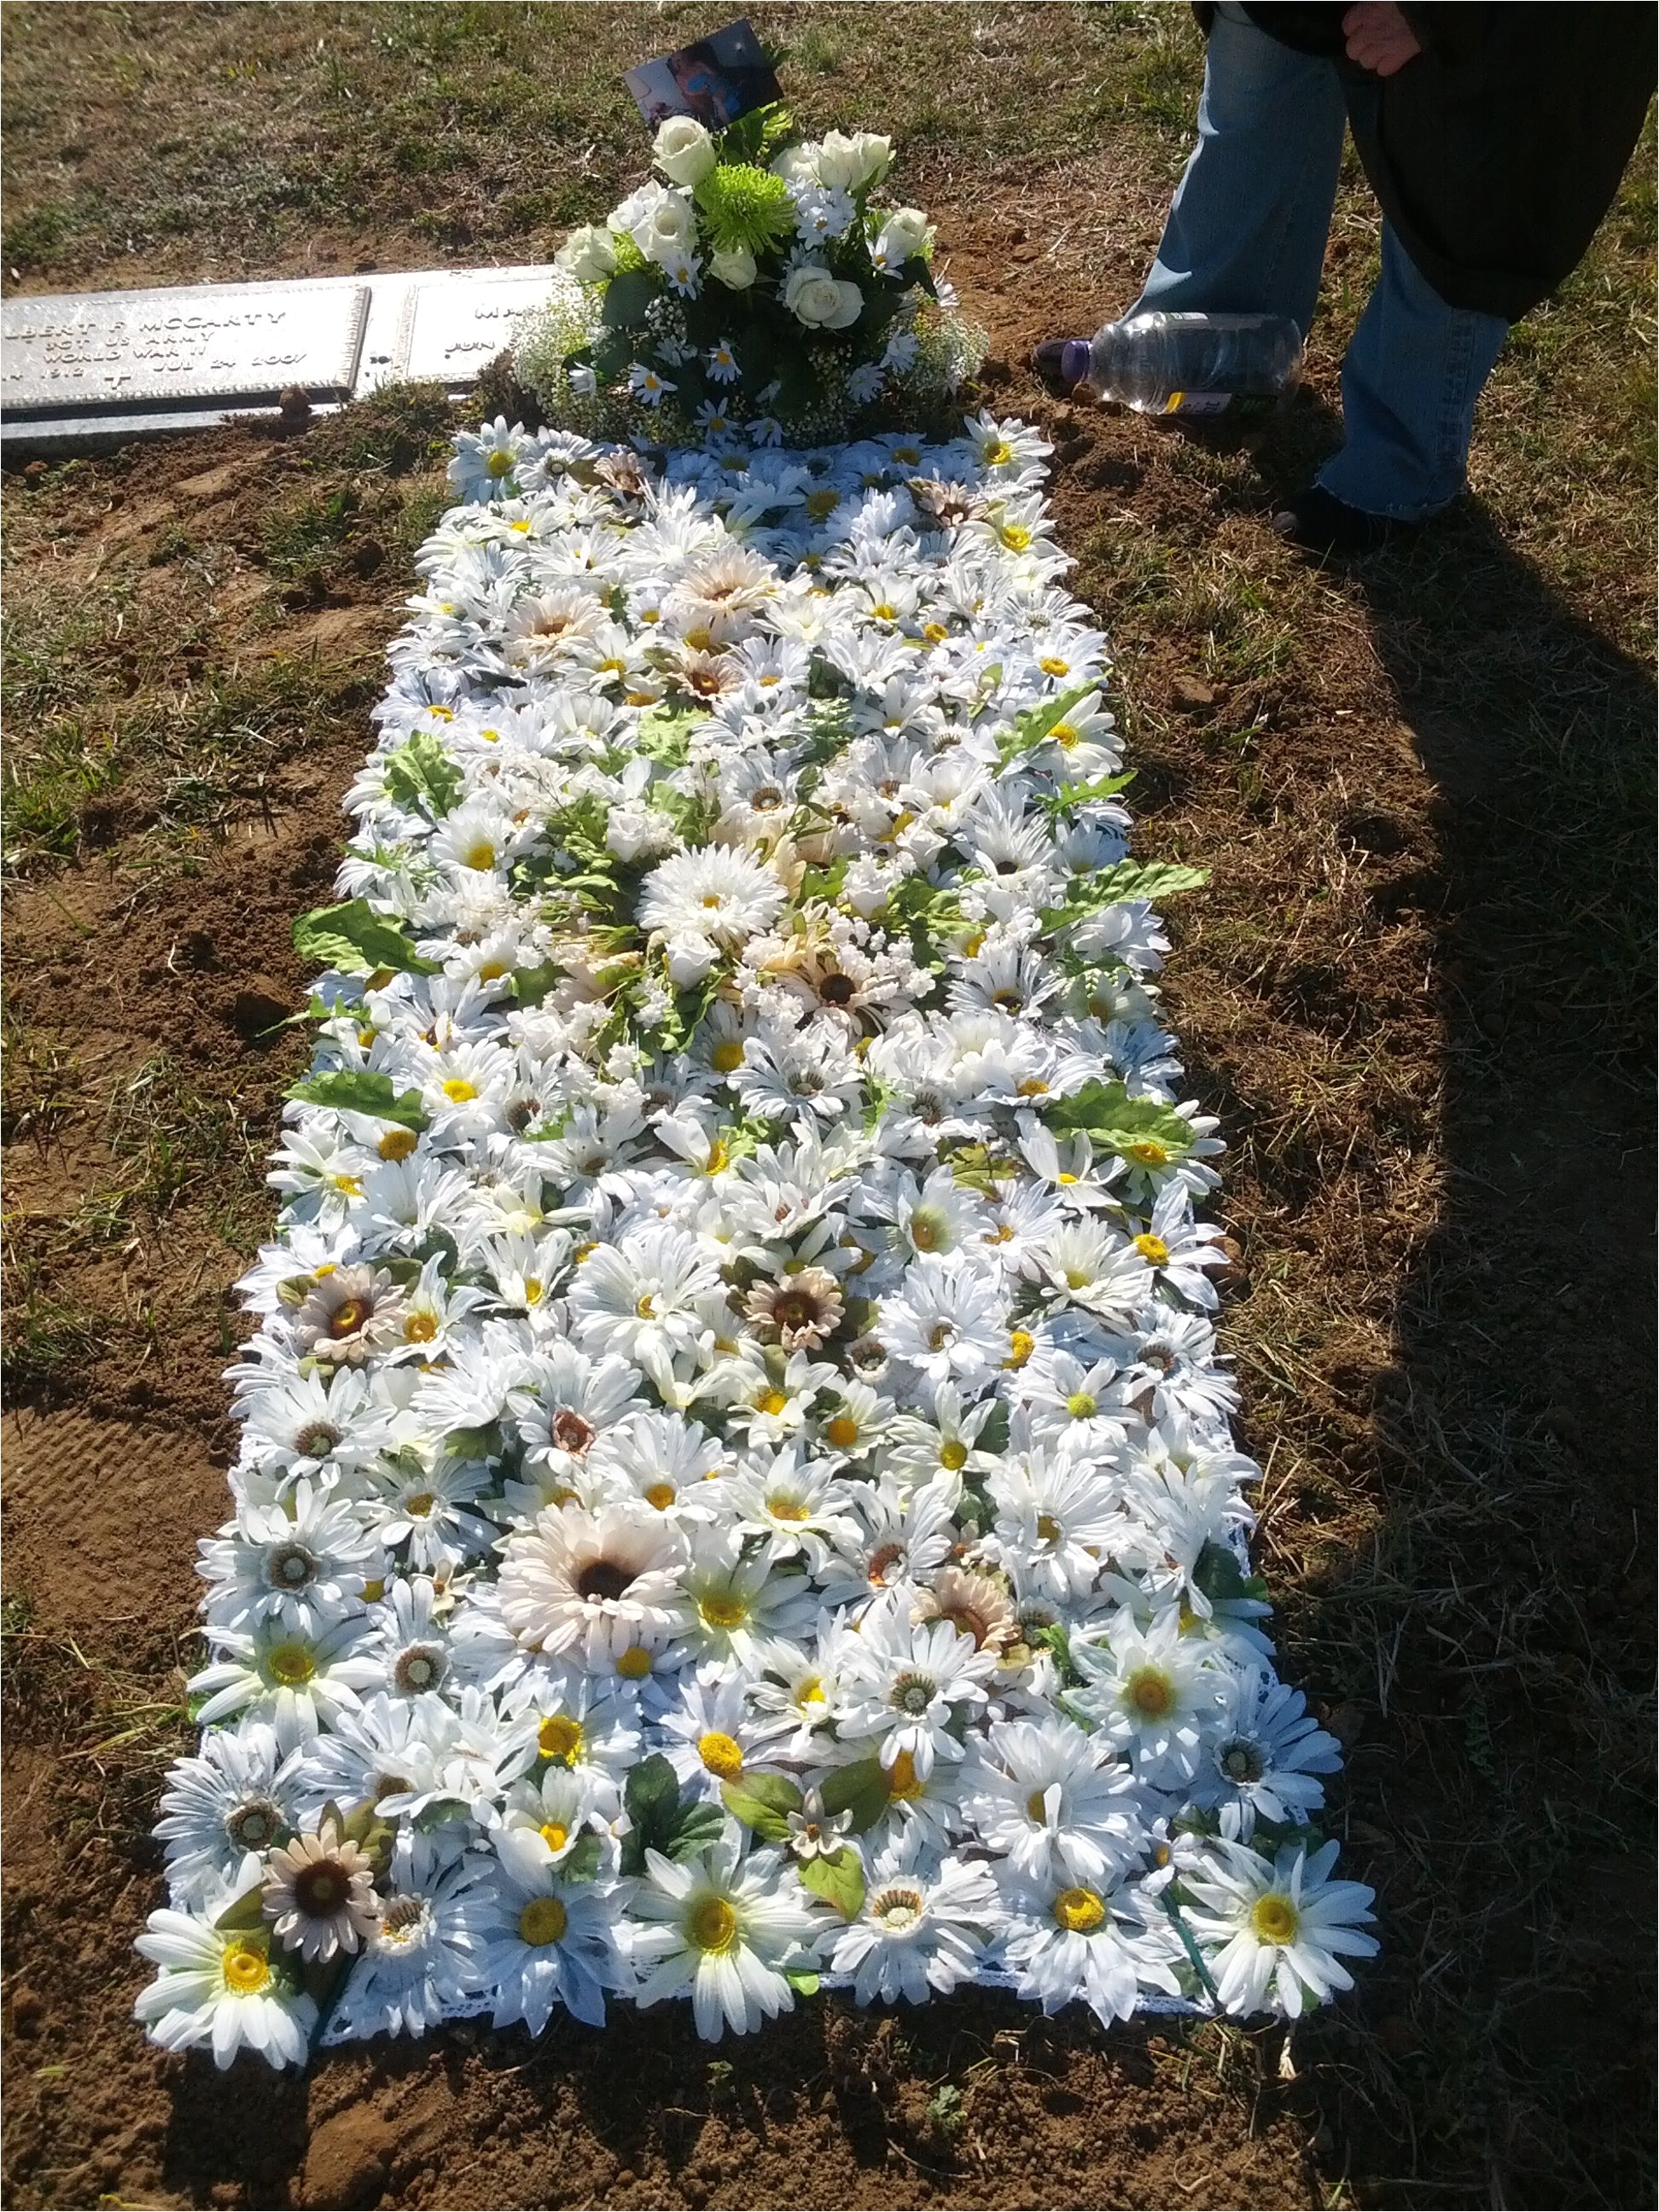 this is a blanket made from artificial flowers that my sister and i made for our mothers grave